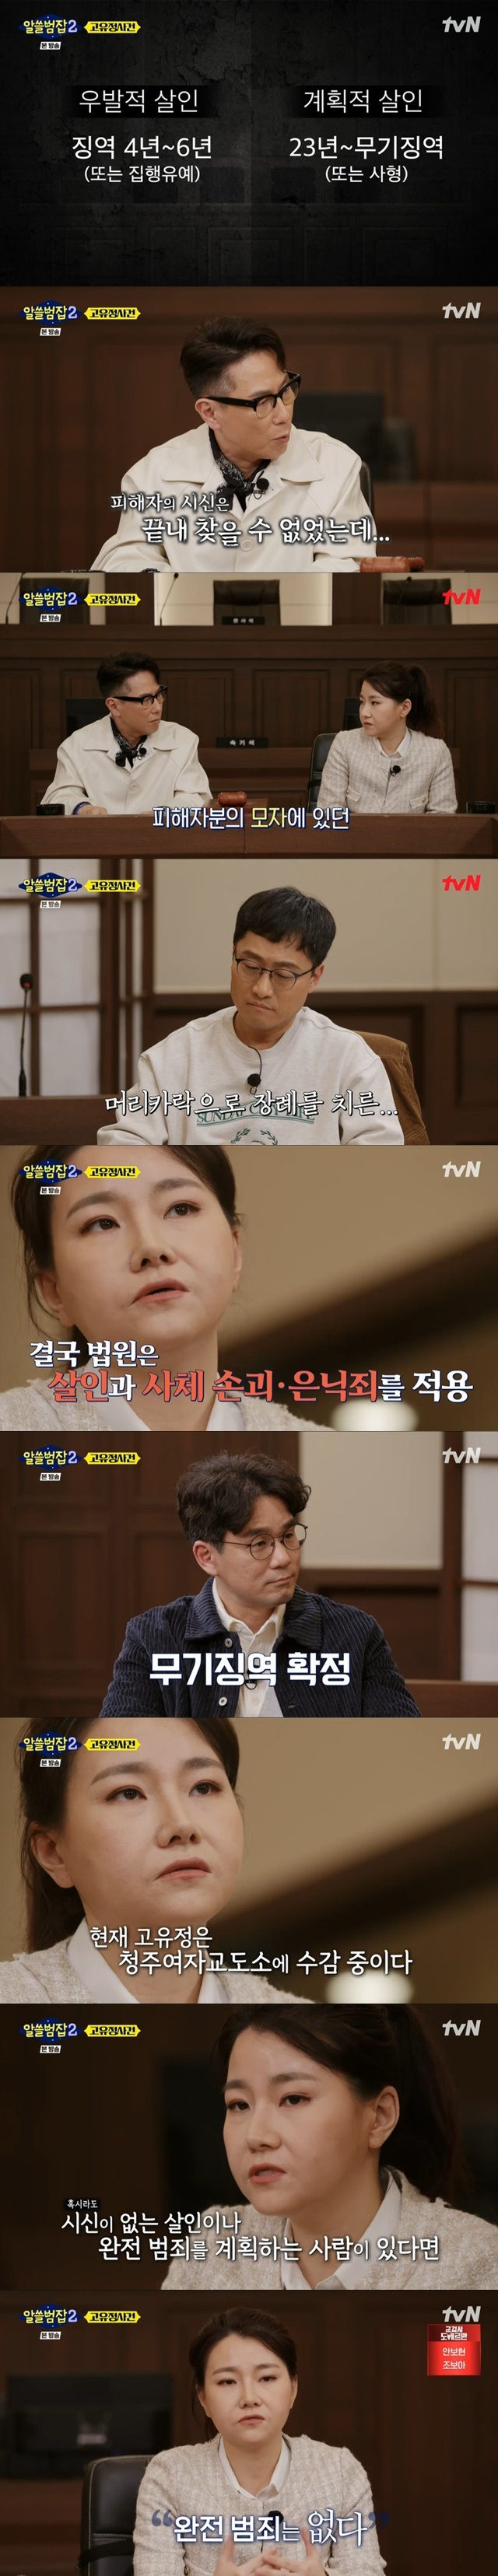 The reason why his late Yu-Jeong ex-husband Murder was found guilty of life imprisonment even though he could not find the body was explained.In TVN ALL-BUM 2, which was broadcast on February 27, Crime psychologist Park Ji-sun introduced the Ko Yu-Jeong incident.The late Yu-Jeong married her ex-husband, Victims, in 2013, gave birth to a child in 2014 and made a divorce adjustment in 2017.Parental and custody went to the late Yu-Jeong, and the husband negotiated the child twice a month, but the late Yu-Jeong did not show the child to Father.After more than a year of repeated situations, Victims applies to the court to fulfill the right to negotiate interviews.Although it was agreed that the interview negotiations should be held at Cheongju Broadcasting, Yu-Jeong unilaterally changed the place to Jeju.It was the spot where Victims met her child in two years: meeting at the Mart parking lot, buying watermelons, curry ingredients and going to the reserved unmanned Kids pension.The childs statement says that he and Father ate curry for dinner and did not eat.The late Yu-Jeong got the child to play video games in the room and kilted her husband with an esophagus prepared.The next day, Yu-Jeong took the child to his home and cleaned the body at the pension. He bought various items at Mart in Jeju Island and delivered the courier service to his home.I bought cleaning supplies like detergent, rocks, rubber gloves, and then I got on the ferry and dumped the garbage in the night when there were no people.He also wrote a text on Victims cell phone, saying, I will sue for attempted sexual assault, and wrote a self-titled play that said, I am sorry, do not sue.The case became an issue when the late Yu-Jeong claimed to be an accidental Murder: he was washing up to eat watermelon and claimed that Victims had stabbed him once with a knife he was trying to sexually assault.If it was an accidental Murder, he could be sentenced to four years in prison or even suspended.But Park Ji-sun pointed out that everything that Yu-Jeong planned has caught my ankle.From the day after May 9, when the interview agreement was reached, Yu-Jeongs actions proved that Murder was planned.The high-Yu-Jeong searched for Kids Pension CCTV, unmanned Kids Pension, blood stain erasing, sleeping pills, and bought cold medicines and sleeping pills.I called the pension in advance to make sure that there was no CCTV or resident operator, and the pension had all the garbage in it and I got the suspicion of the operator.Youre going to do something that others dont do to destroy evidence, Park Ji-sun said. Yu-Jeong claimed that he was Victims, and the injuries he asked the police to take pictures were also analyzed as self-injury or other injuries that were pushed by a knife and caught his ankle.Unlike the claim that he accidentally stabbed him once, blood stains remained here and there.Professor Park Ji-sun said, It is a sad part, but I have not found a piece of flesh because I have been damaging and dumping the body.When the bereaved families buried, they buried their hair on their hats. Currently, Yu-Jeong is sentenced to life imprisonment for Murder, body damage, and body concealment, and is in prison at Cheongju Broadcasting Womens Prison.